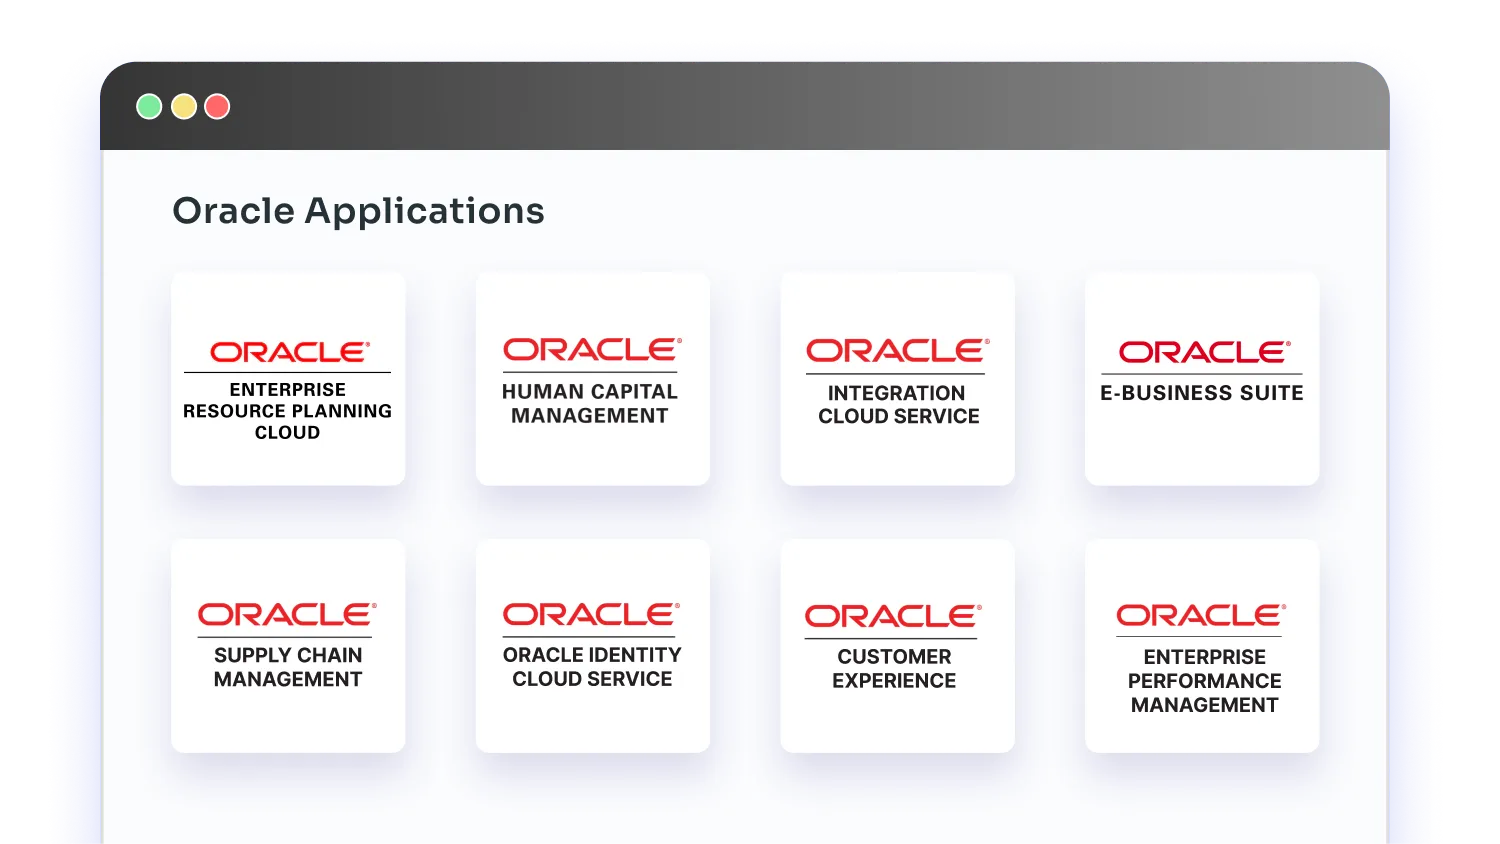 Oracle applications CASB solutions